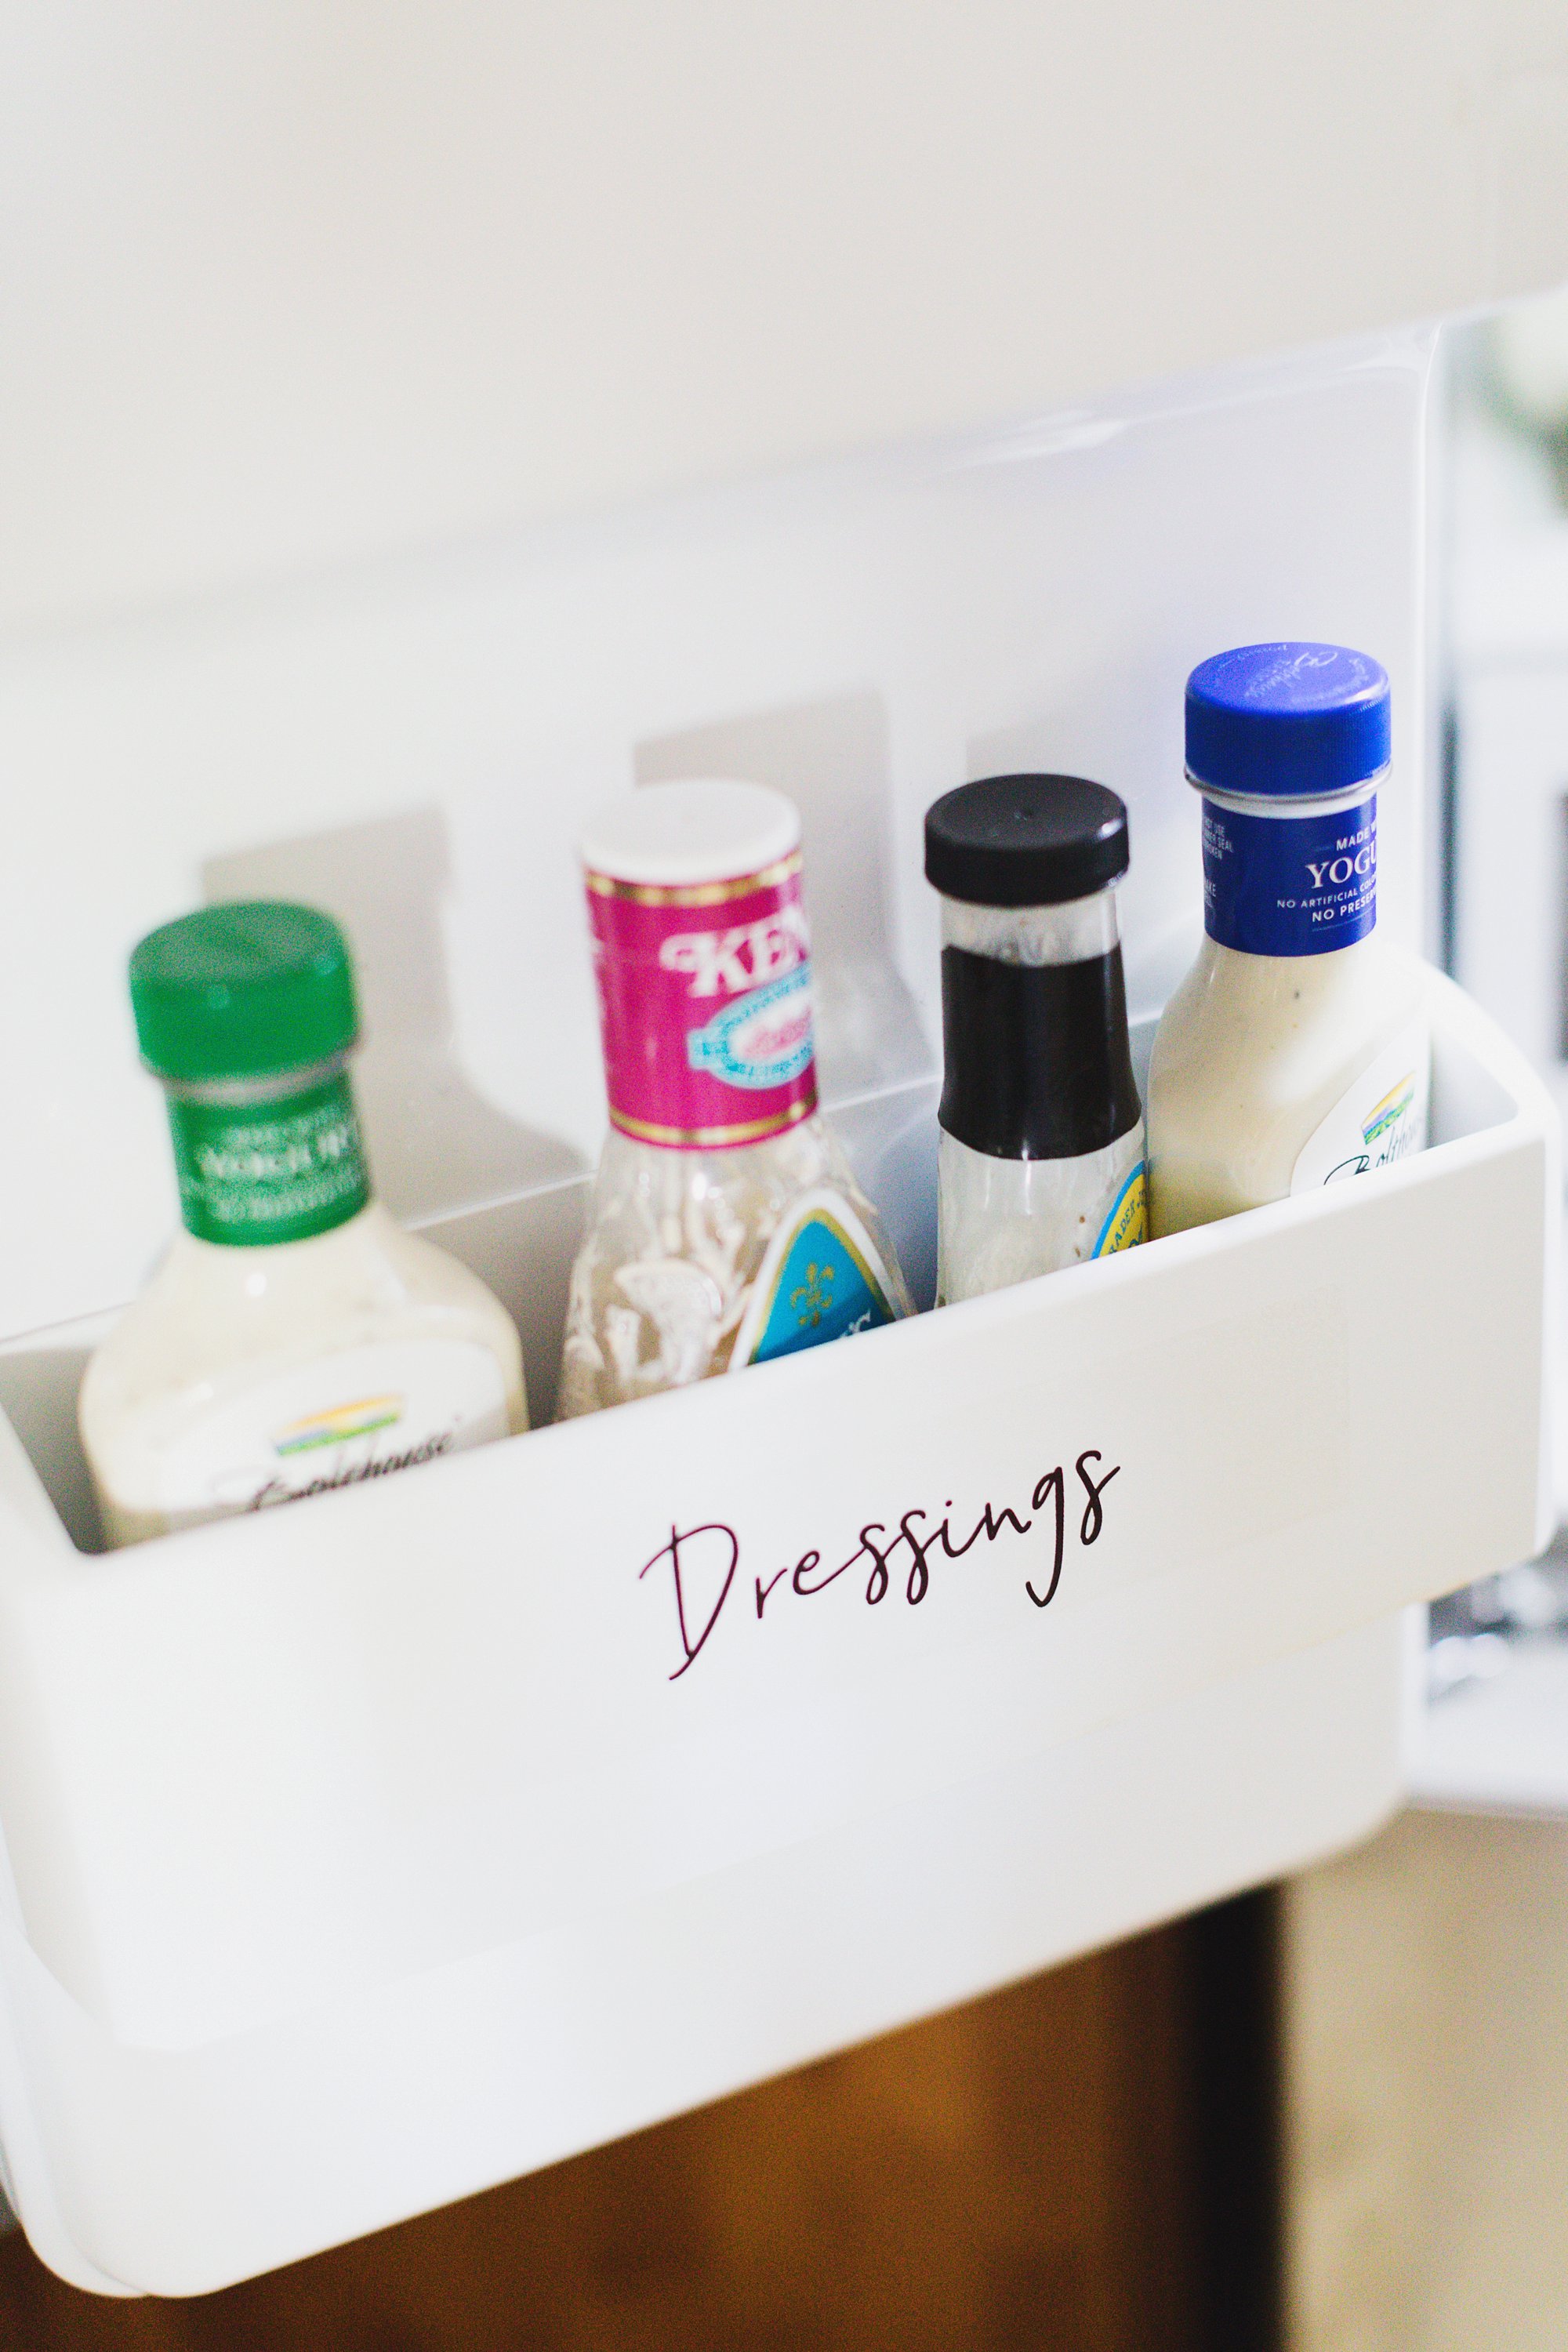 Make your own refrigerator pantry labels for organization a how to guide printing these on clear labels